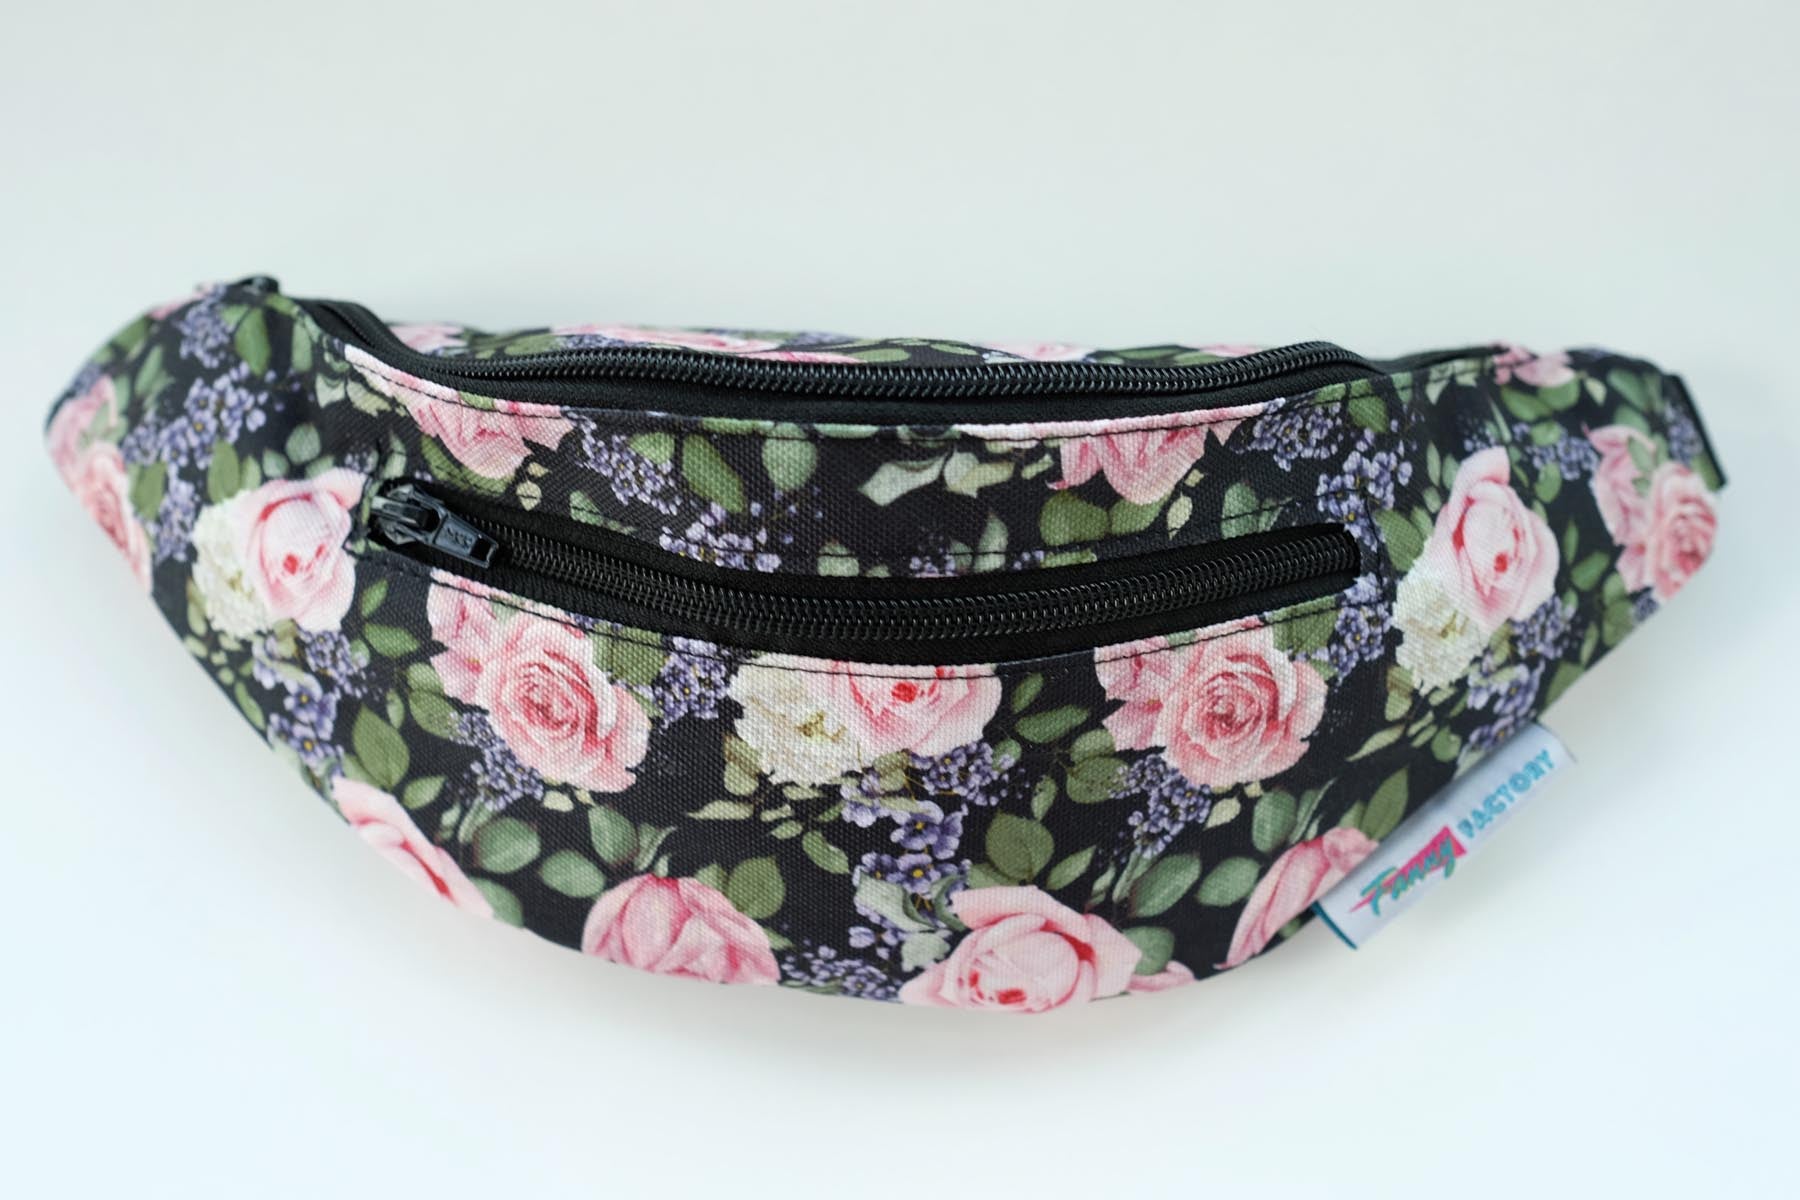 Plus Size Fanny Pack-Pride Indy Check / SaySay Boutique